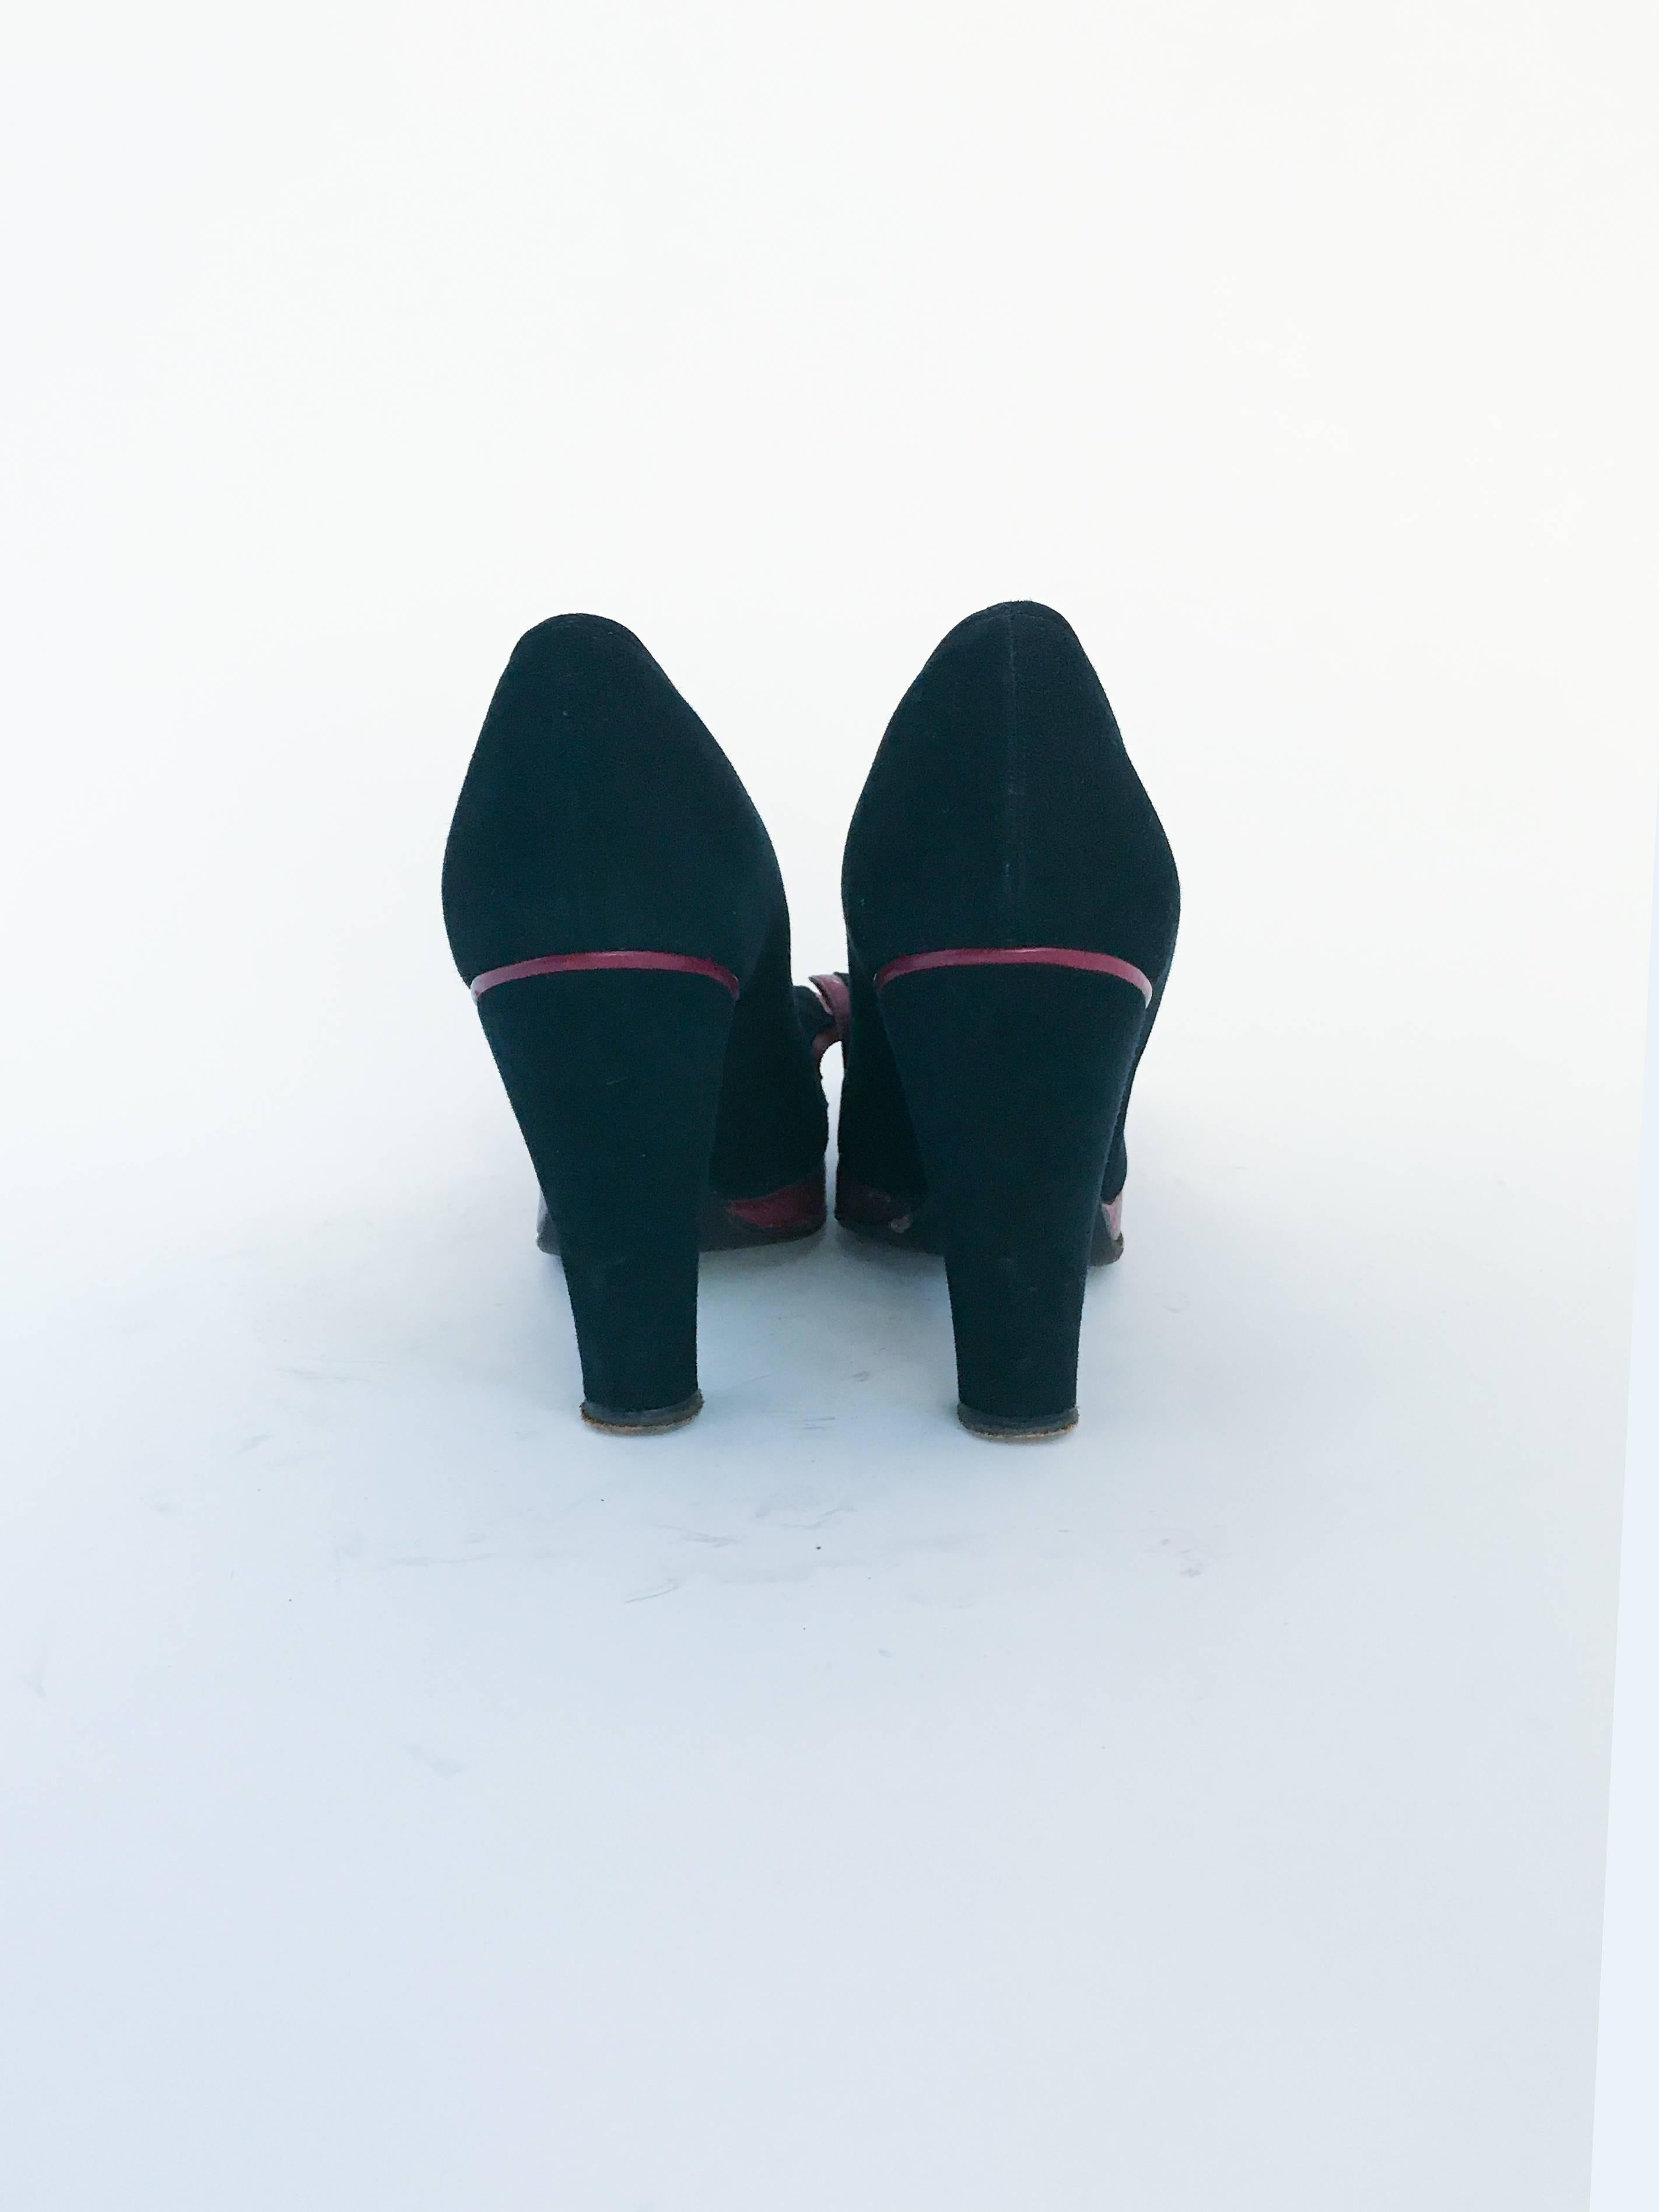 Women's 1930s Black and Red Pumps